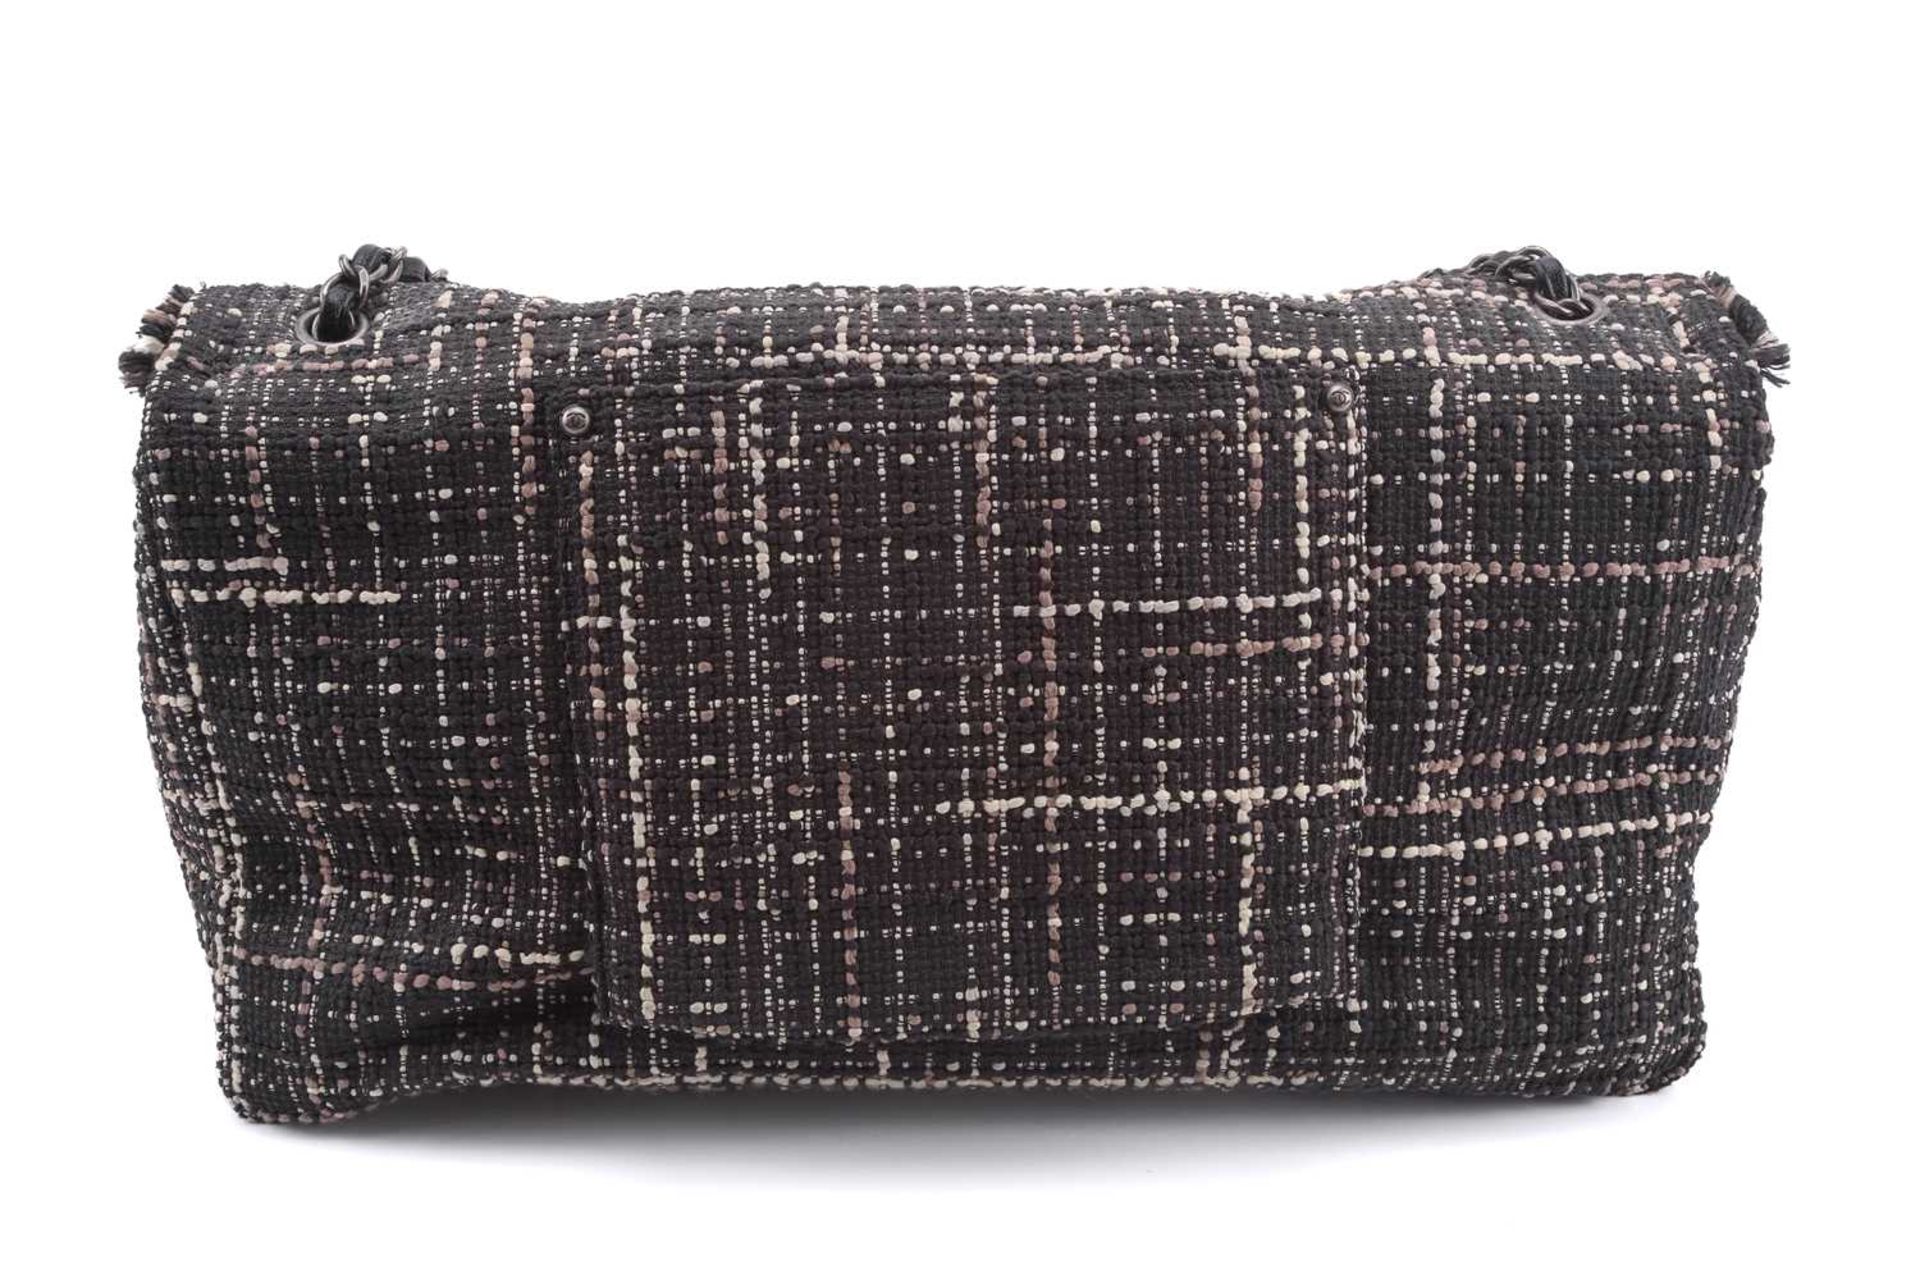 Chanel - XXL Travel jumbo classic flap bag in tweed with black caviar leather trims, from the S/S - Image 4 of 36